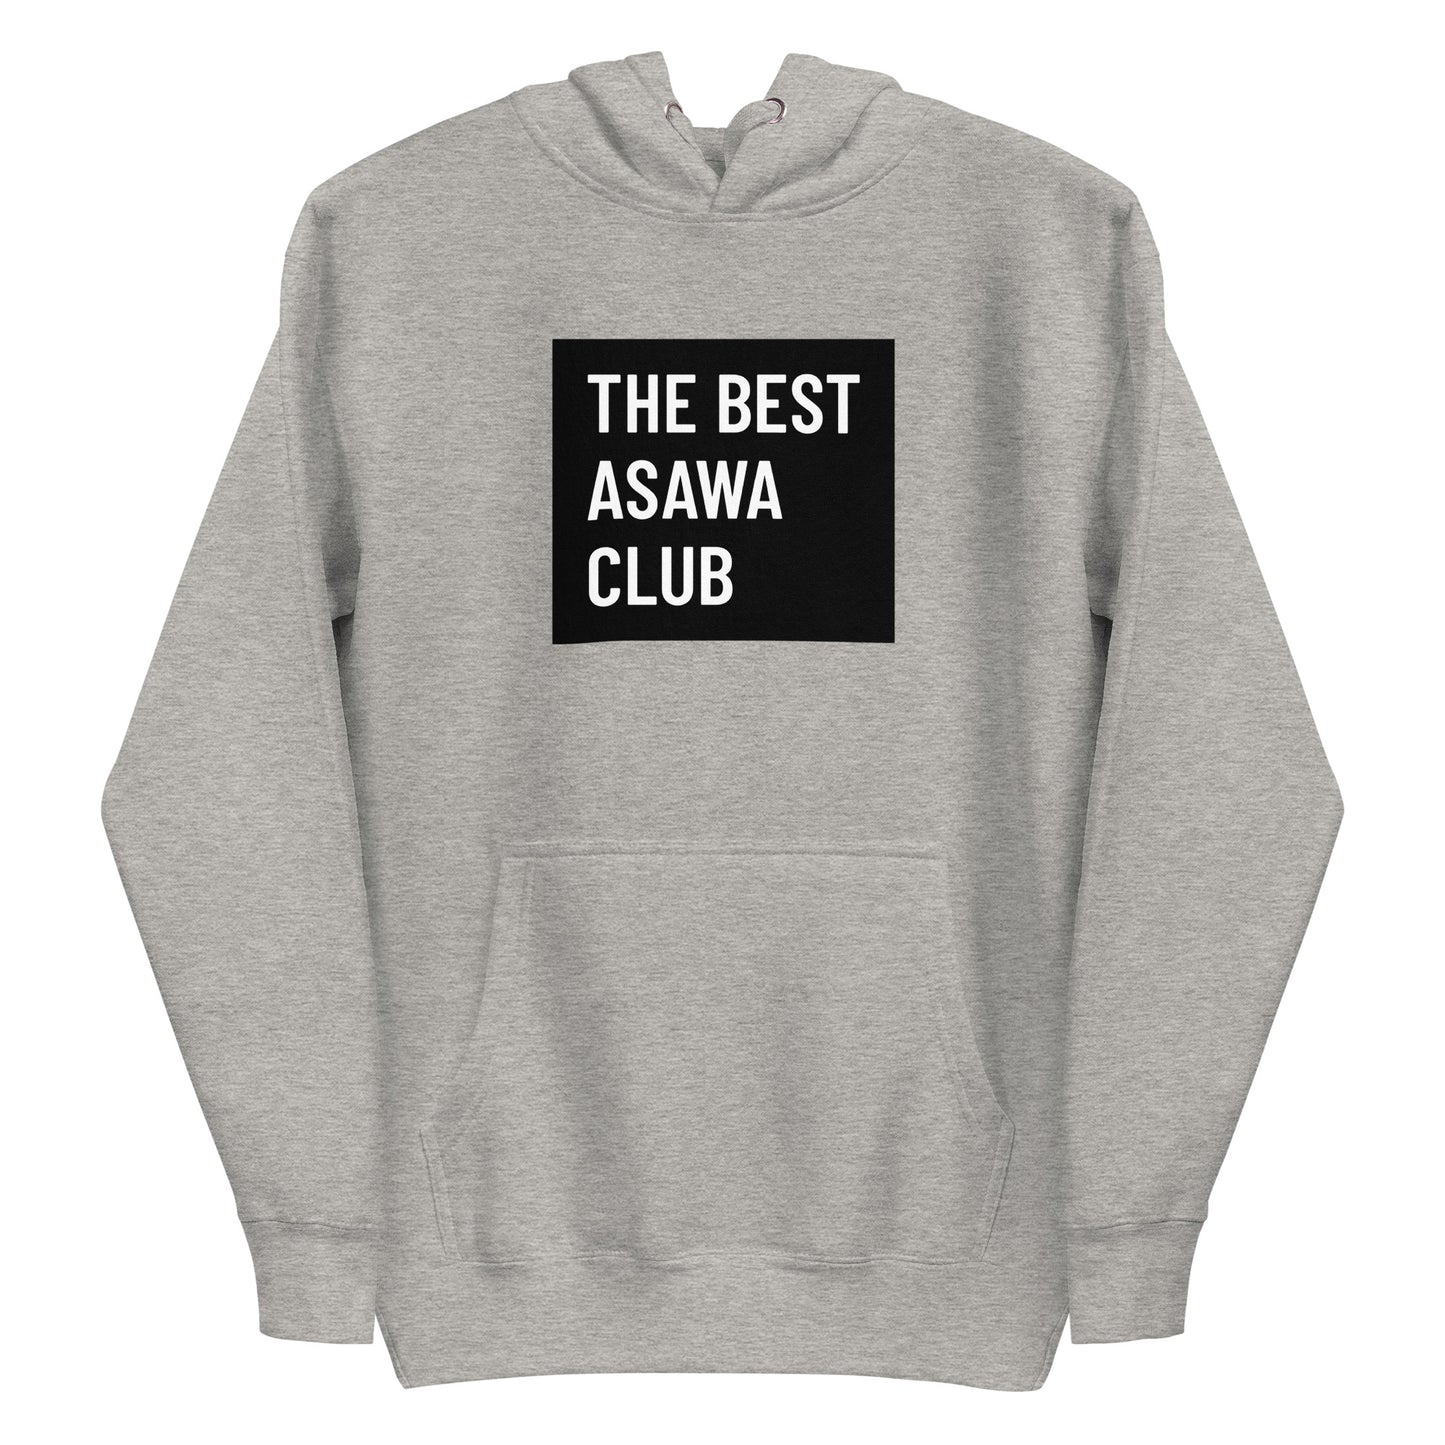 Filipino Hoodie Best Asawa Club Valentine's Day Gift Couple Merch in color variant Gray